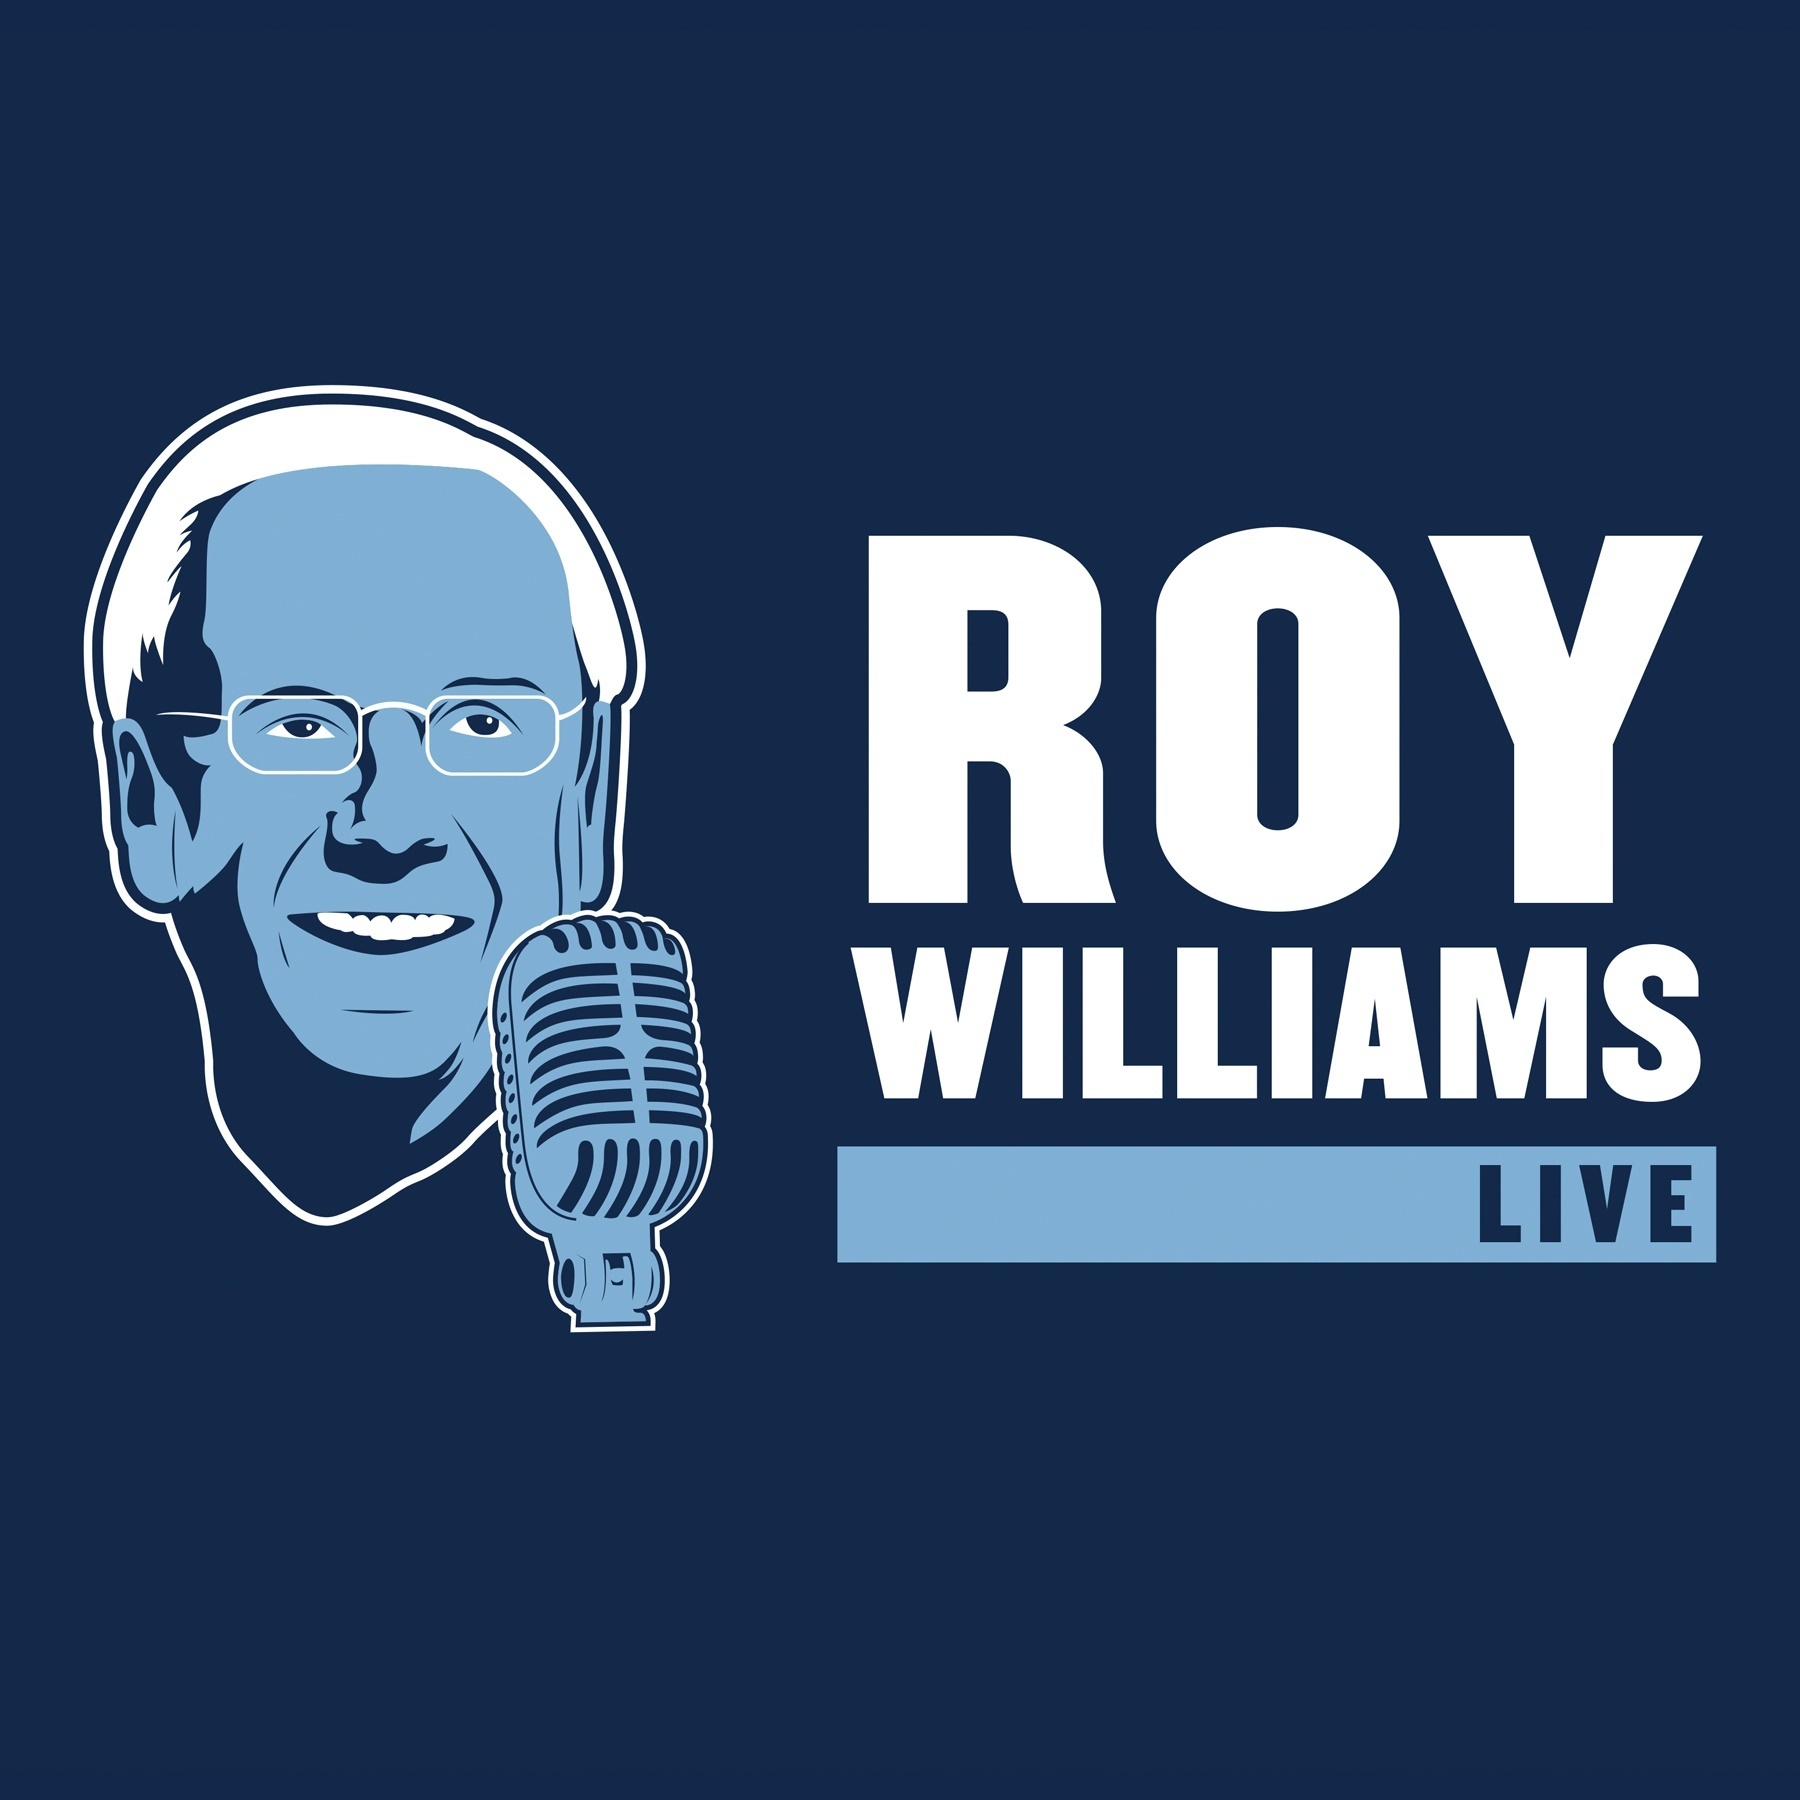 Roy Williams Live from 11-27-17